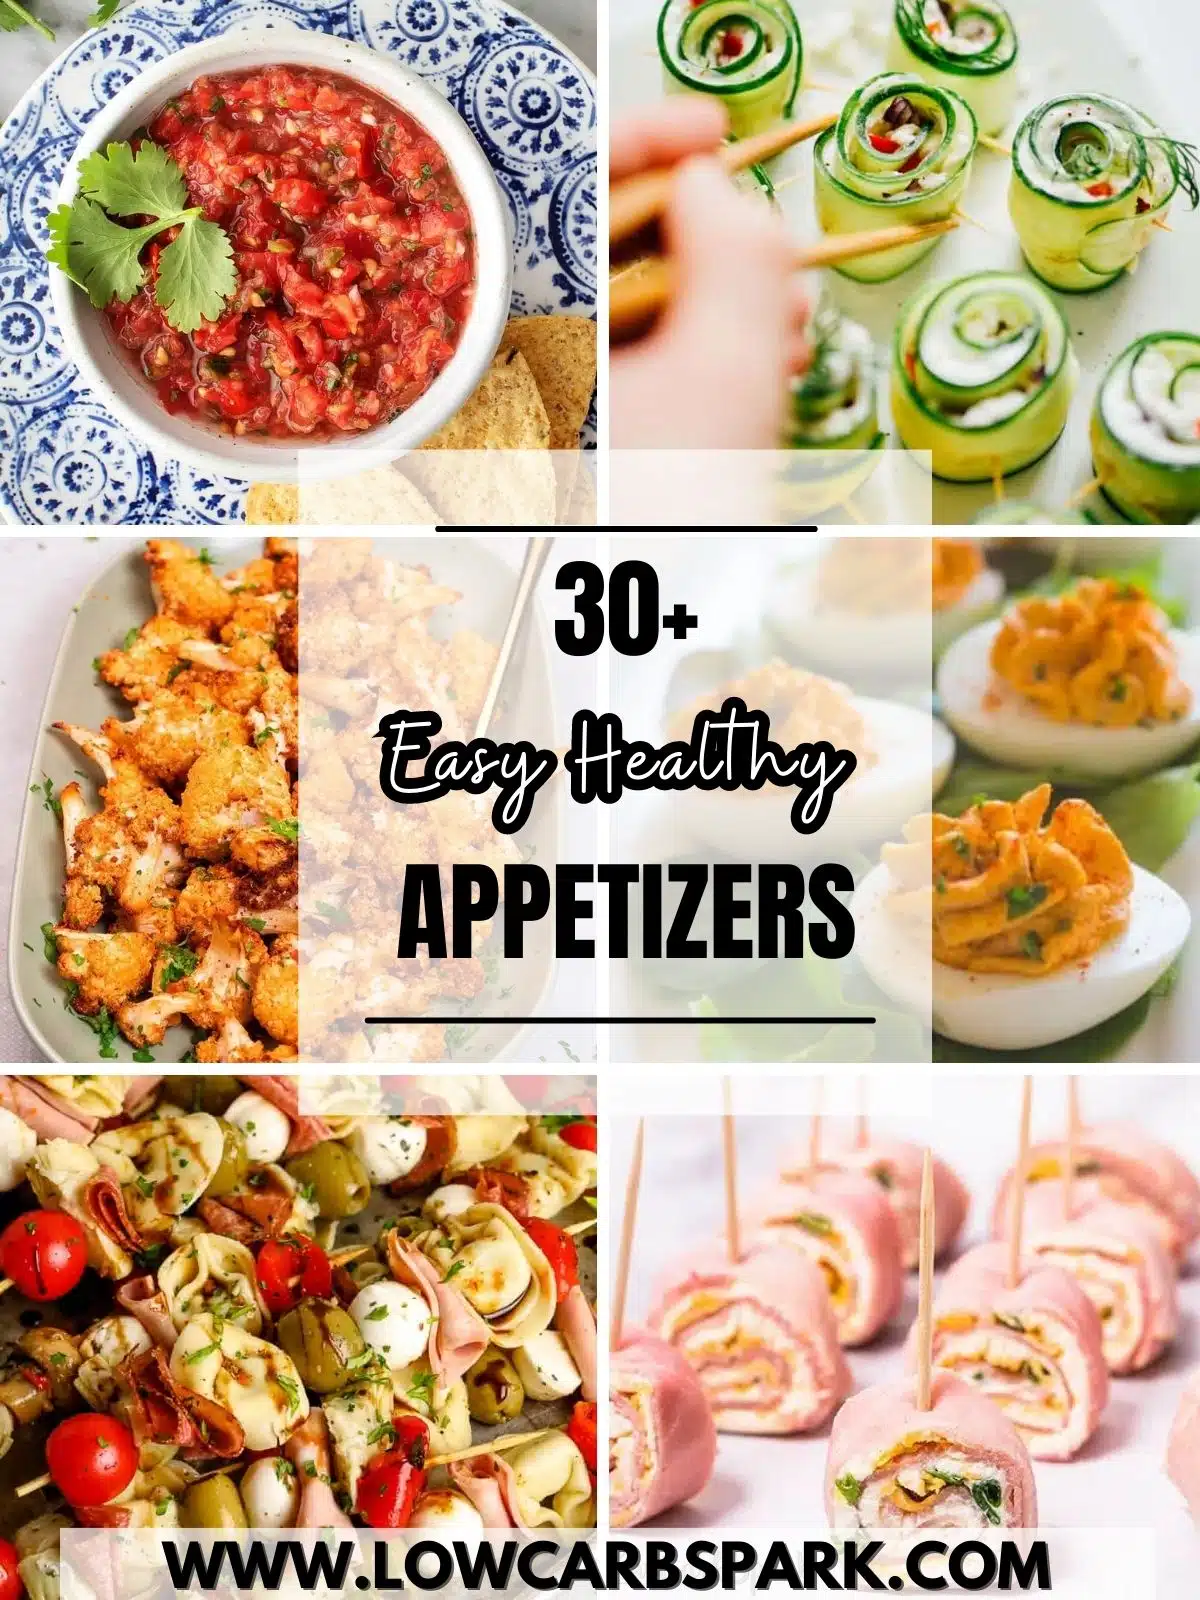 30+ Easy Healthy Appetizers